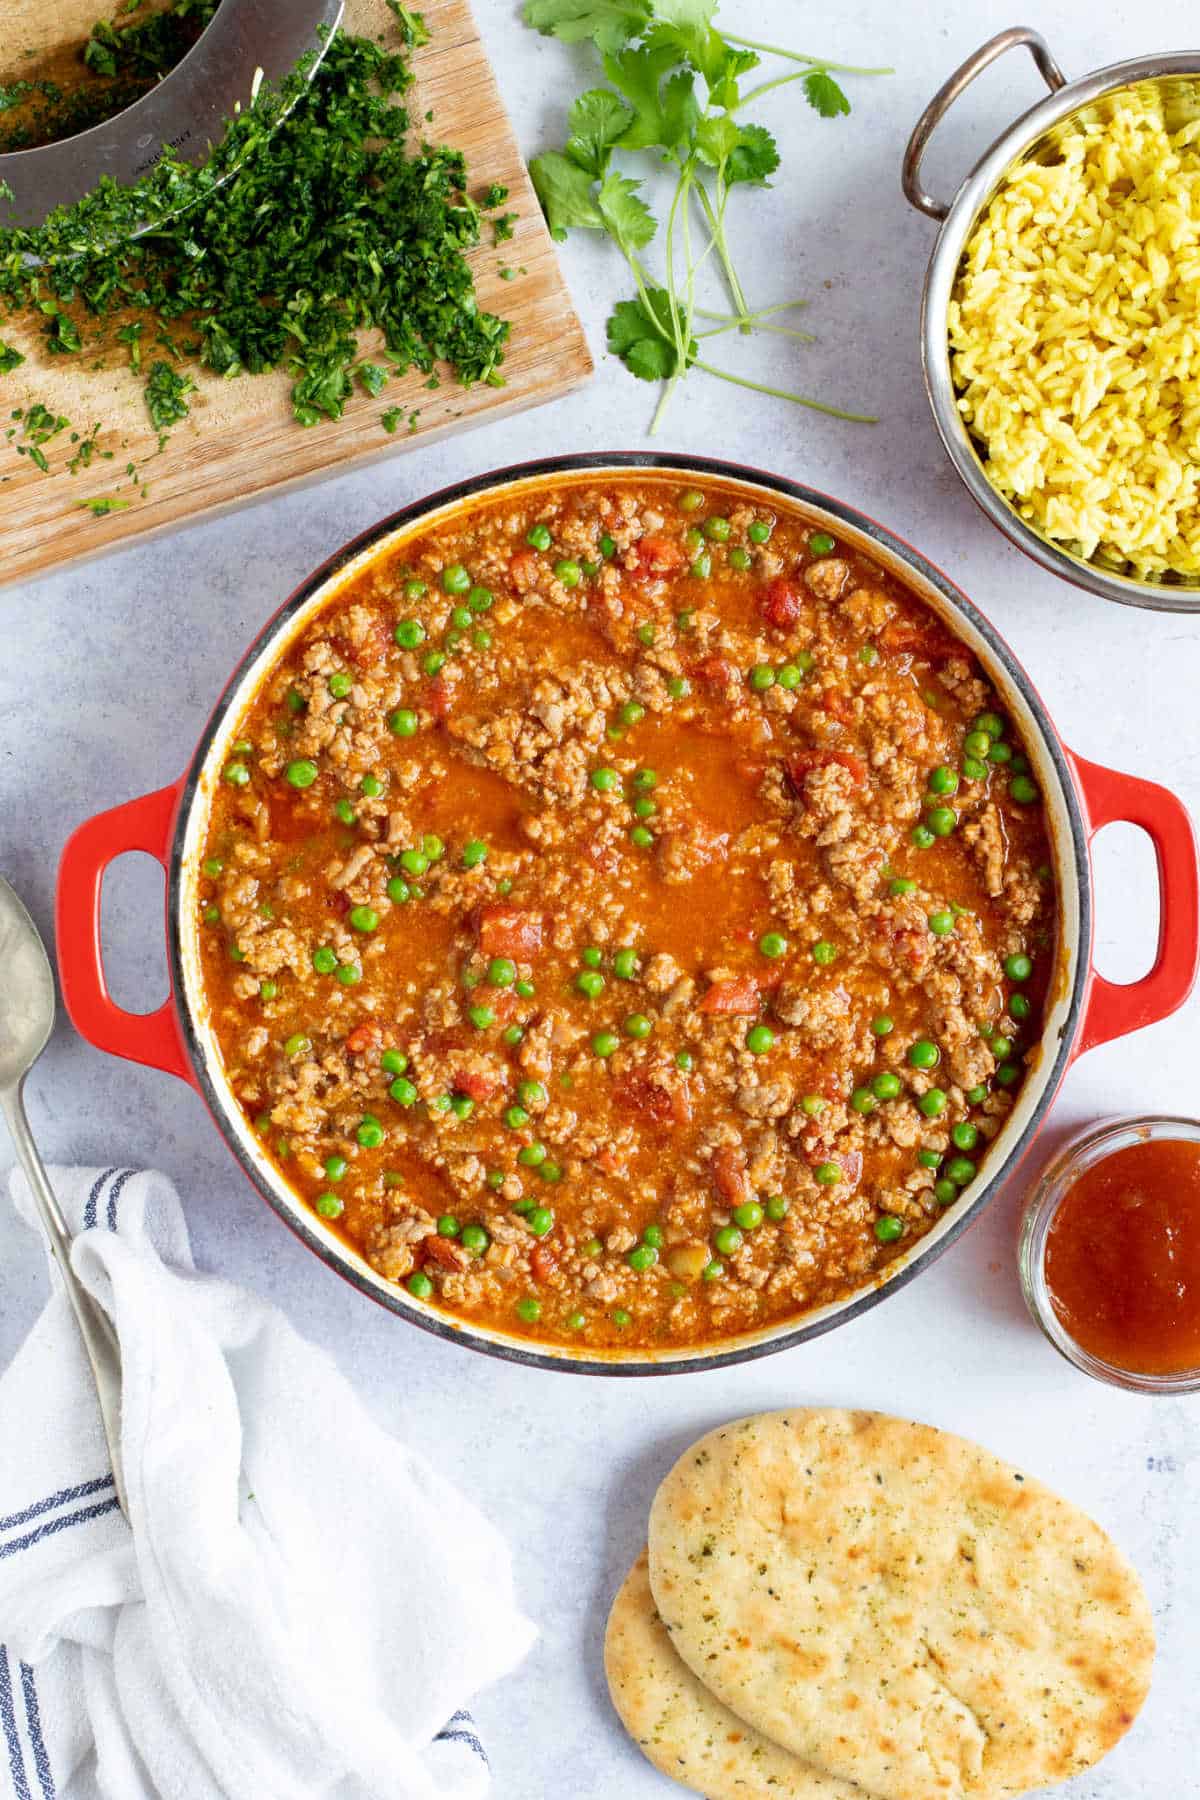 Turkey keema curry in a red pan with pilau rice and coriander.